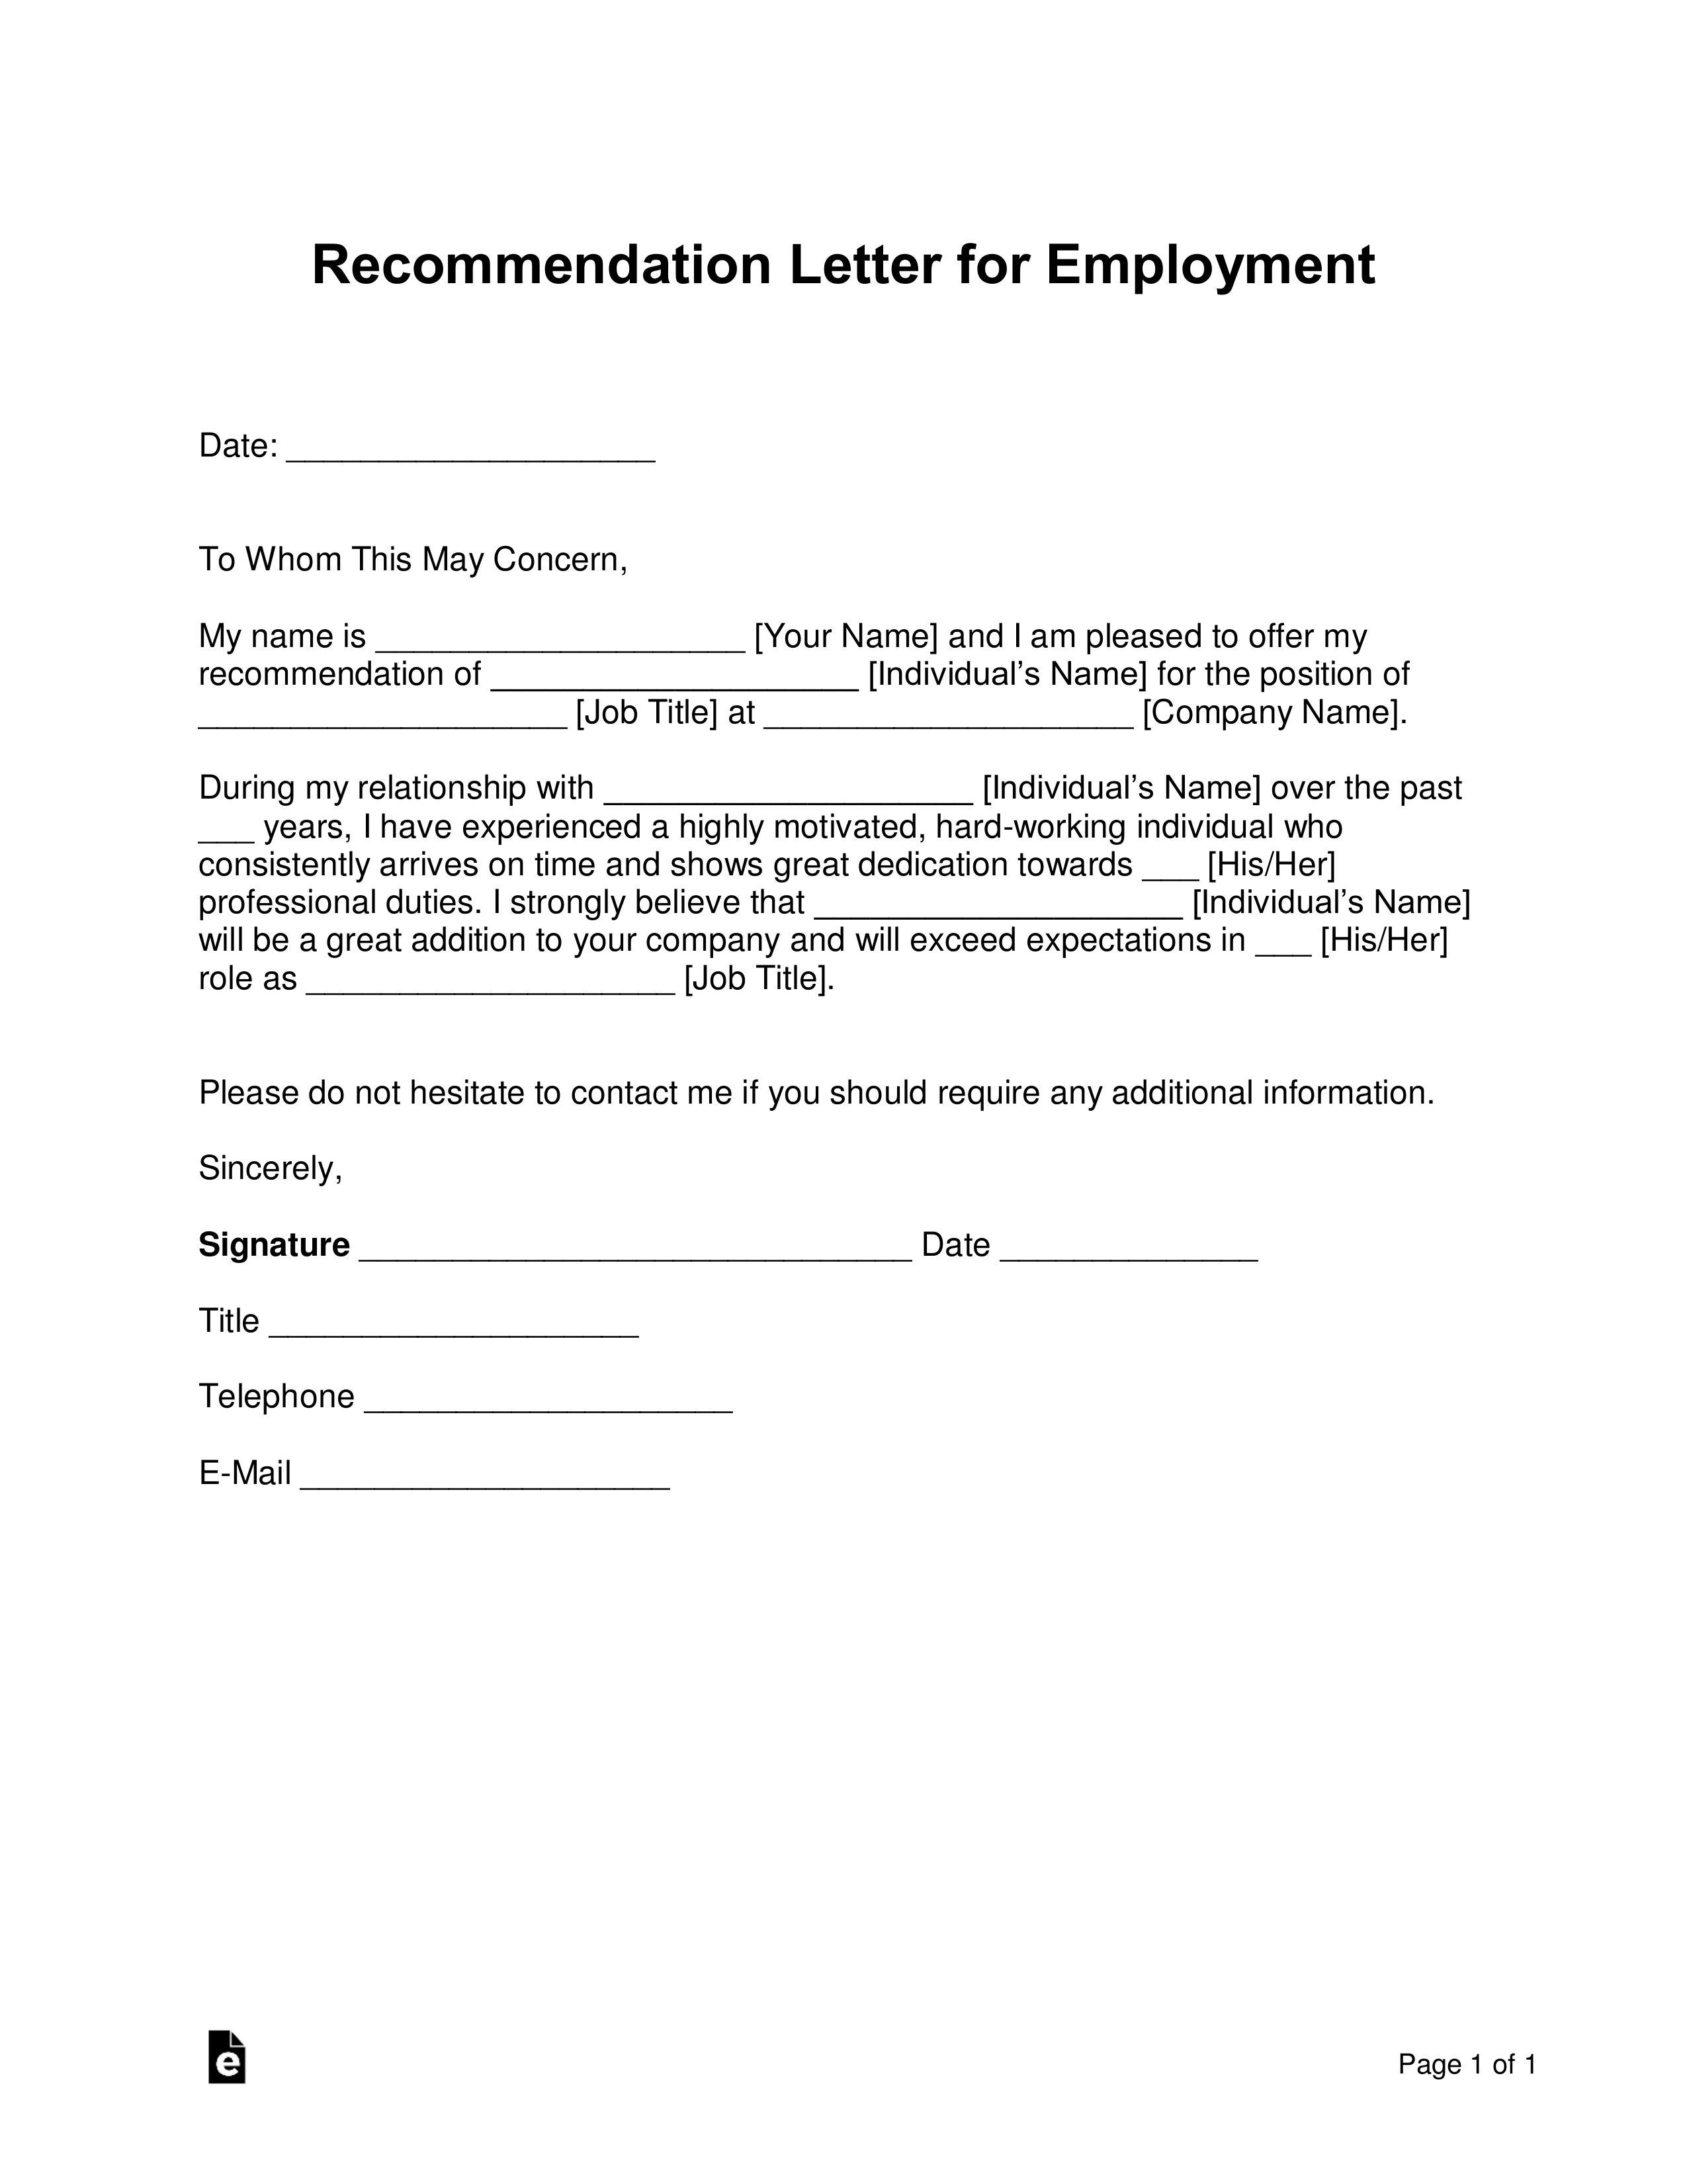 Employee Recommendation Letter Sample from eforms.com